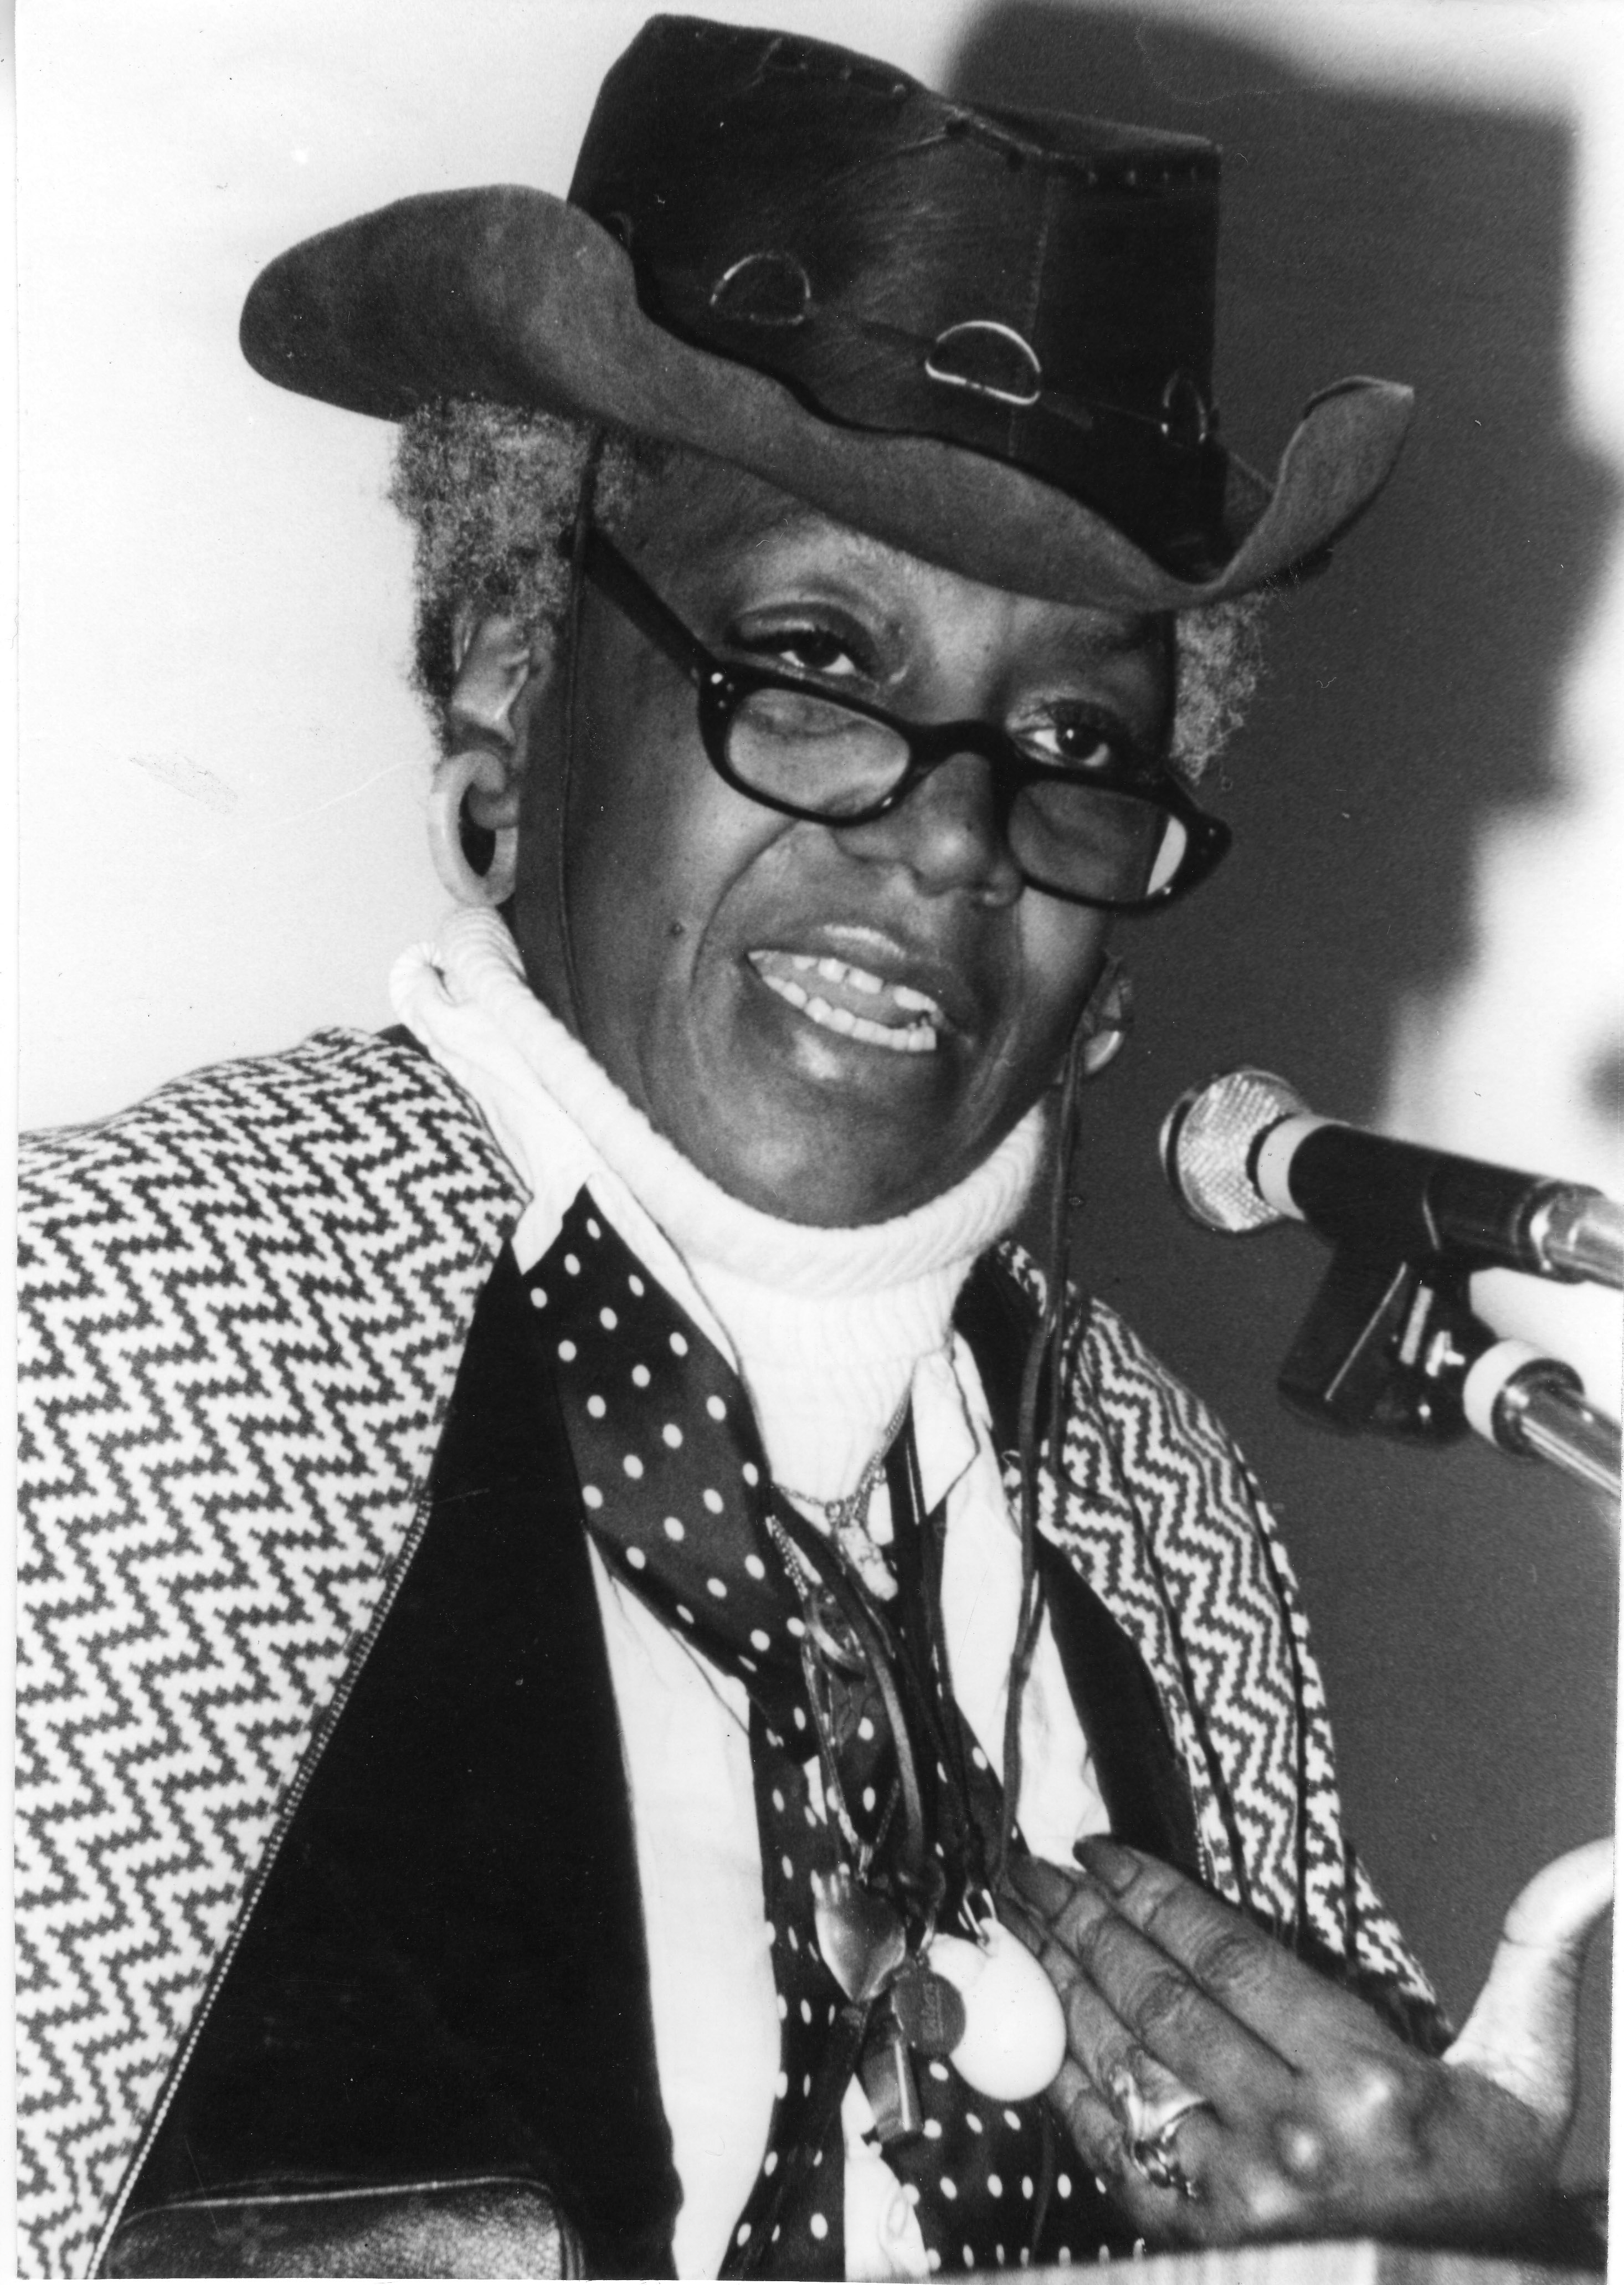 Portrait of Florynce Kennedy speaking at California State University